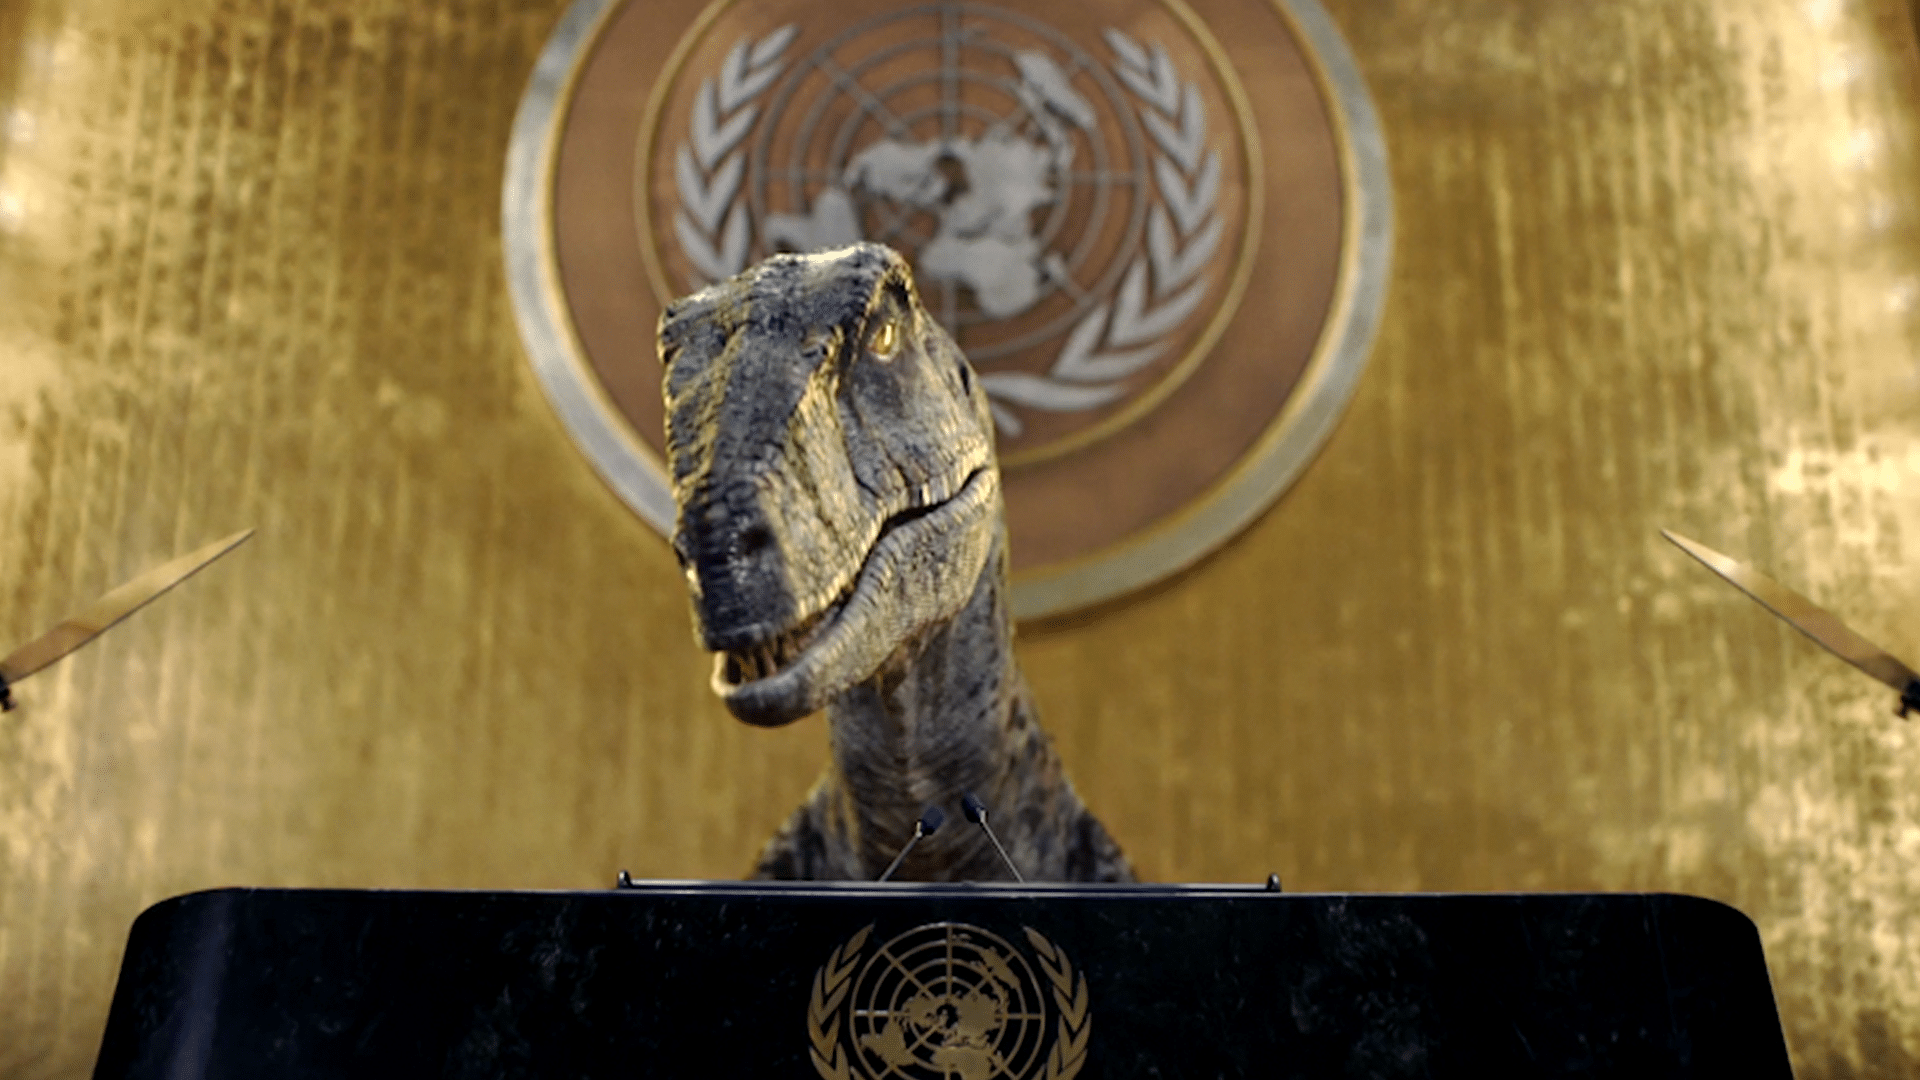 fossil fuels leading us to extinction a warning from a dinosaur at the un